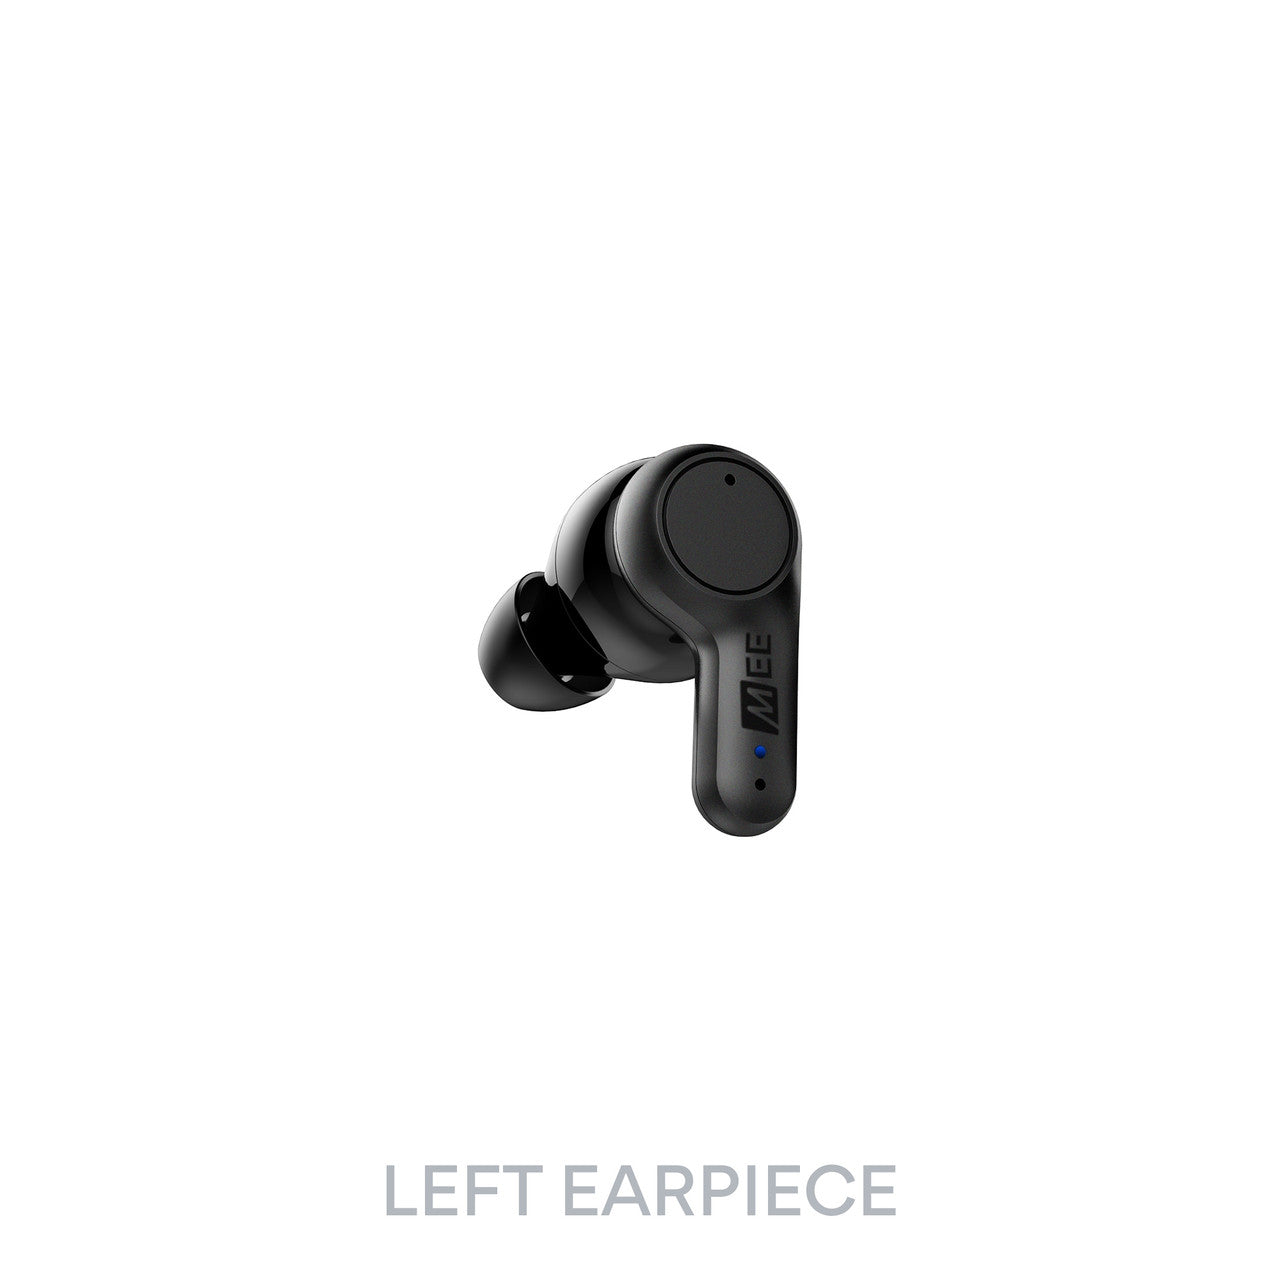 Image of Replacement Parts for X20 Truly Wireless Sports Earphones.